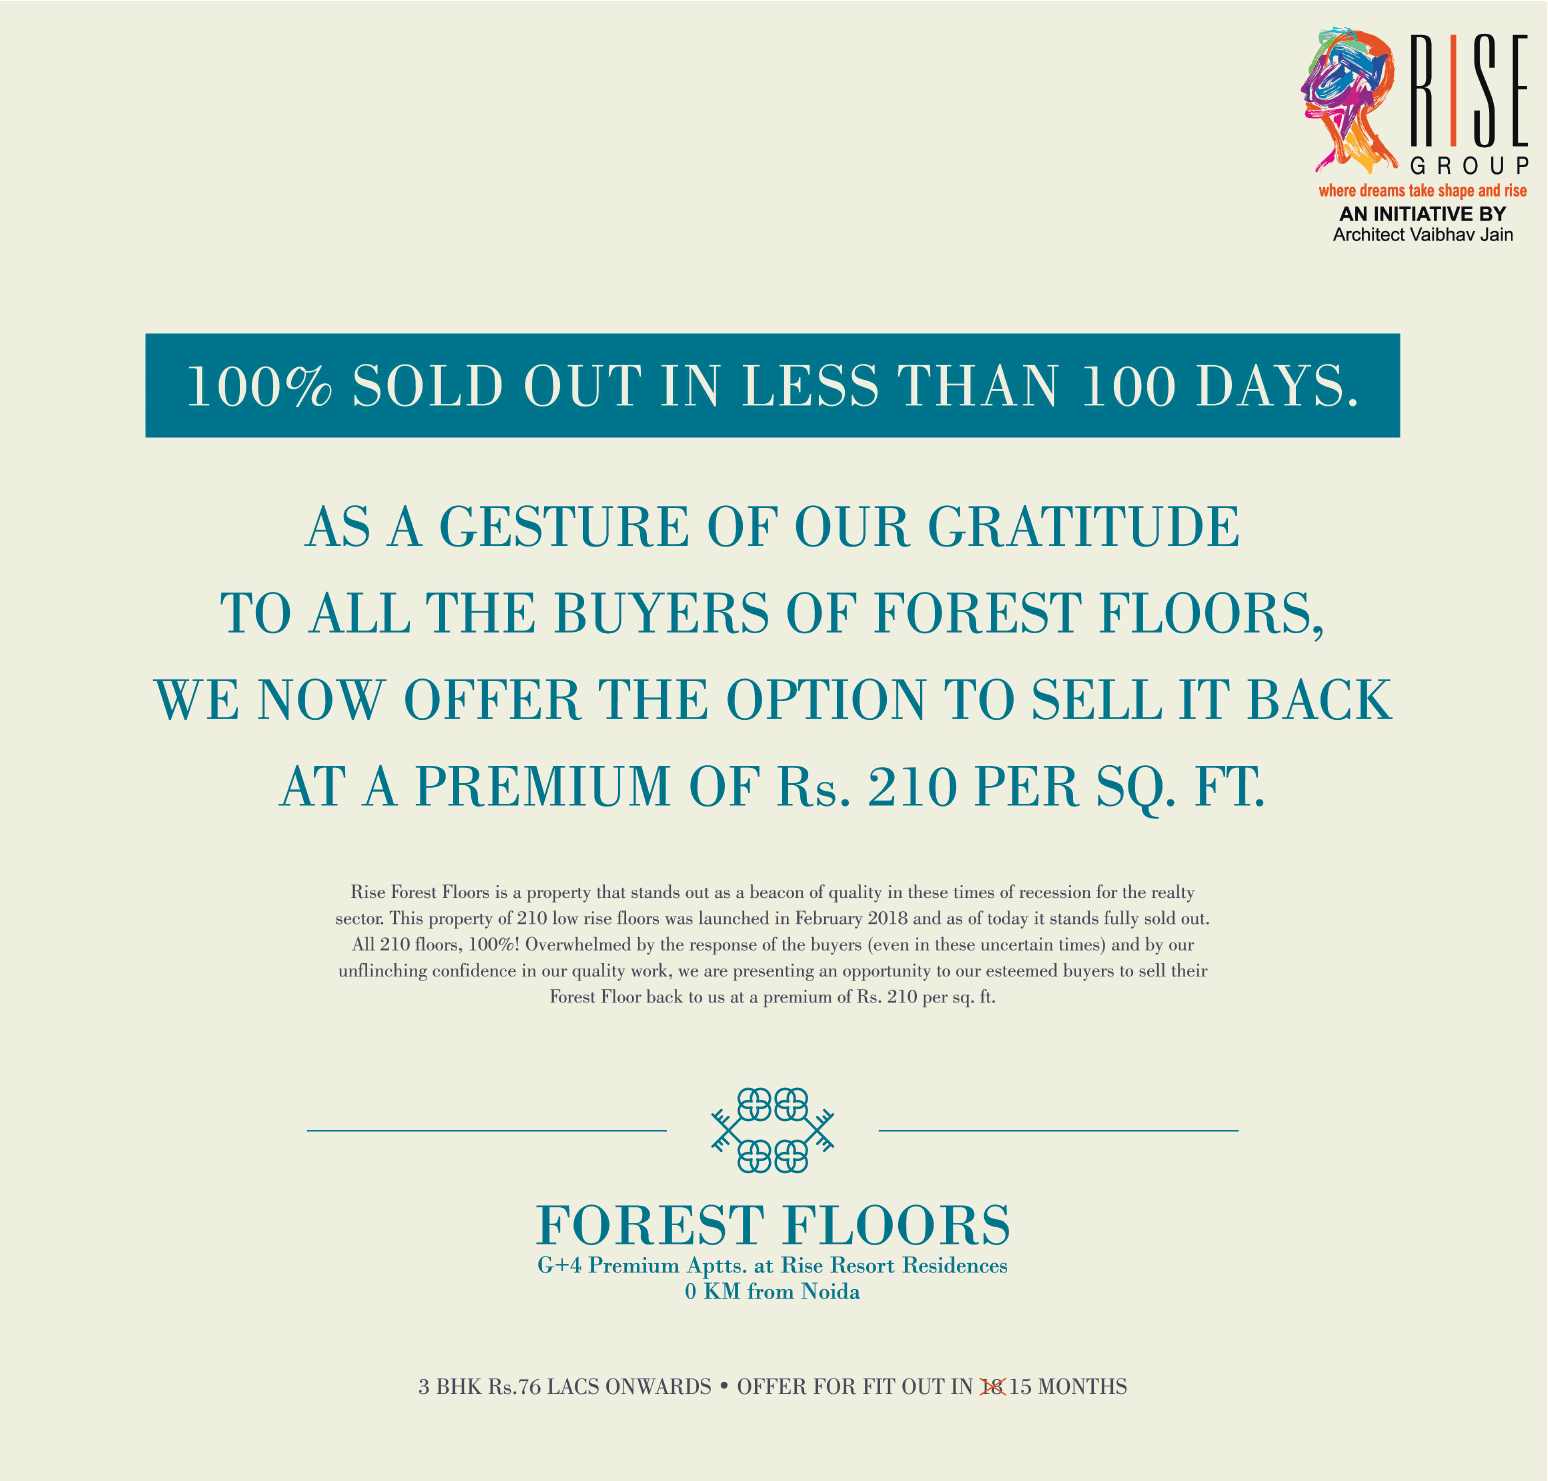 Book home at a premium of Rs. 210 per sq.ft. at Rise Forest Floors, Greater Noida